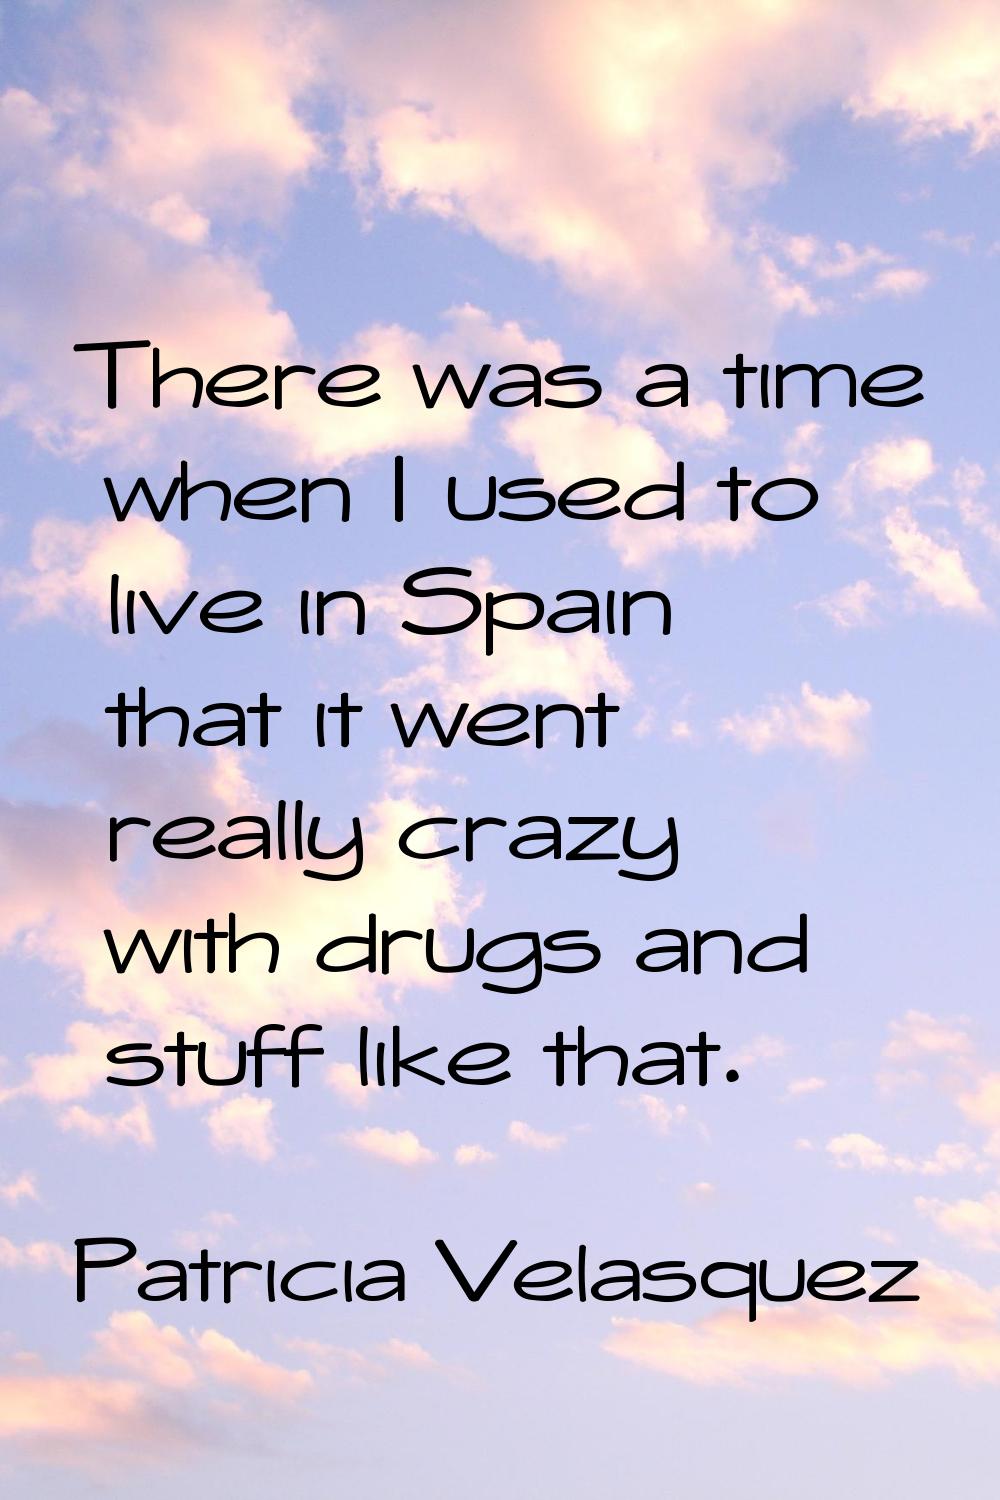 There was a time when I used to live in Spain that it went really crazy with drugs and stuff like t